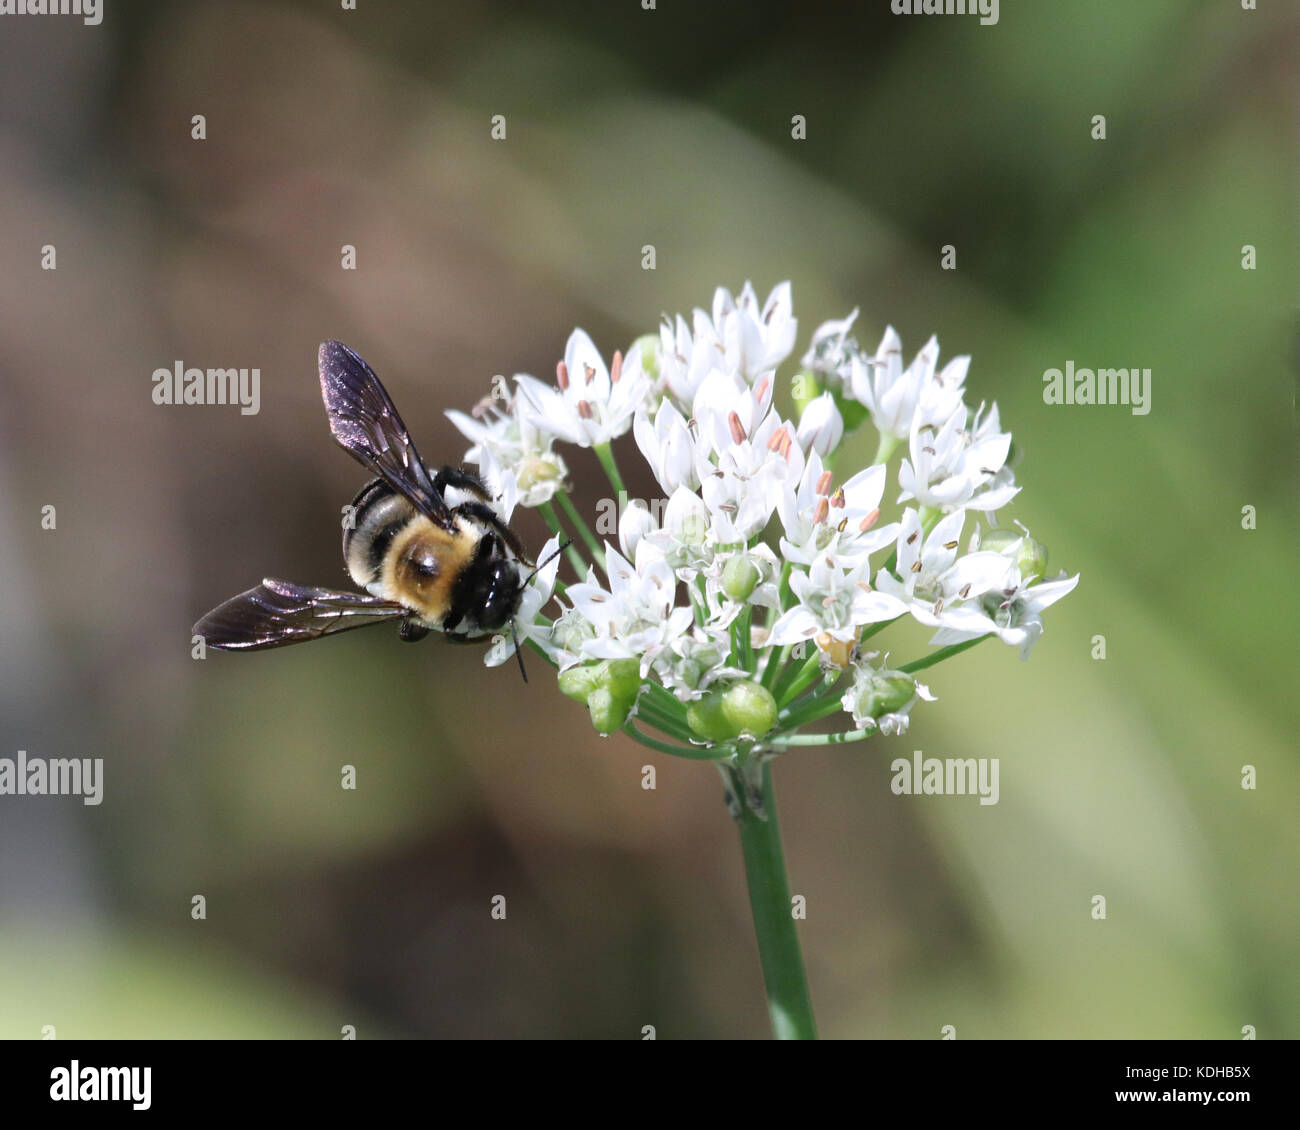 Common Eastern Bumble Bee on a white garlic flower cluster Stock Photo